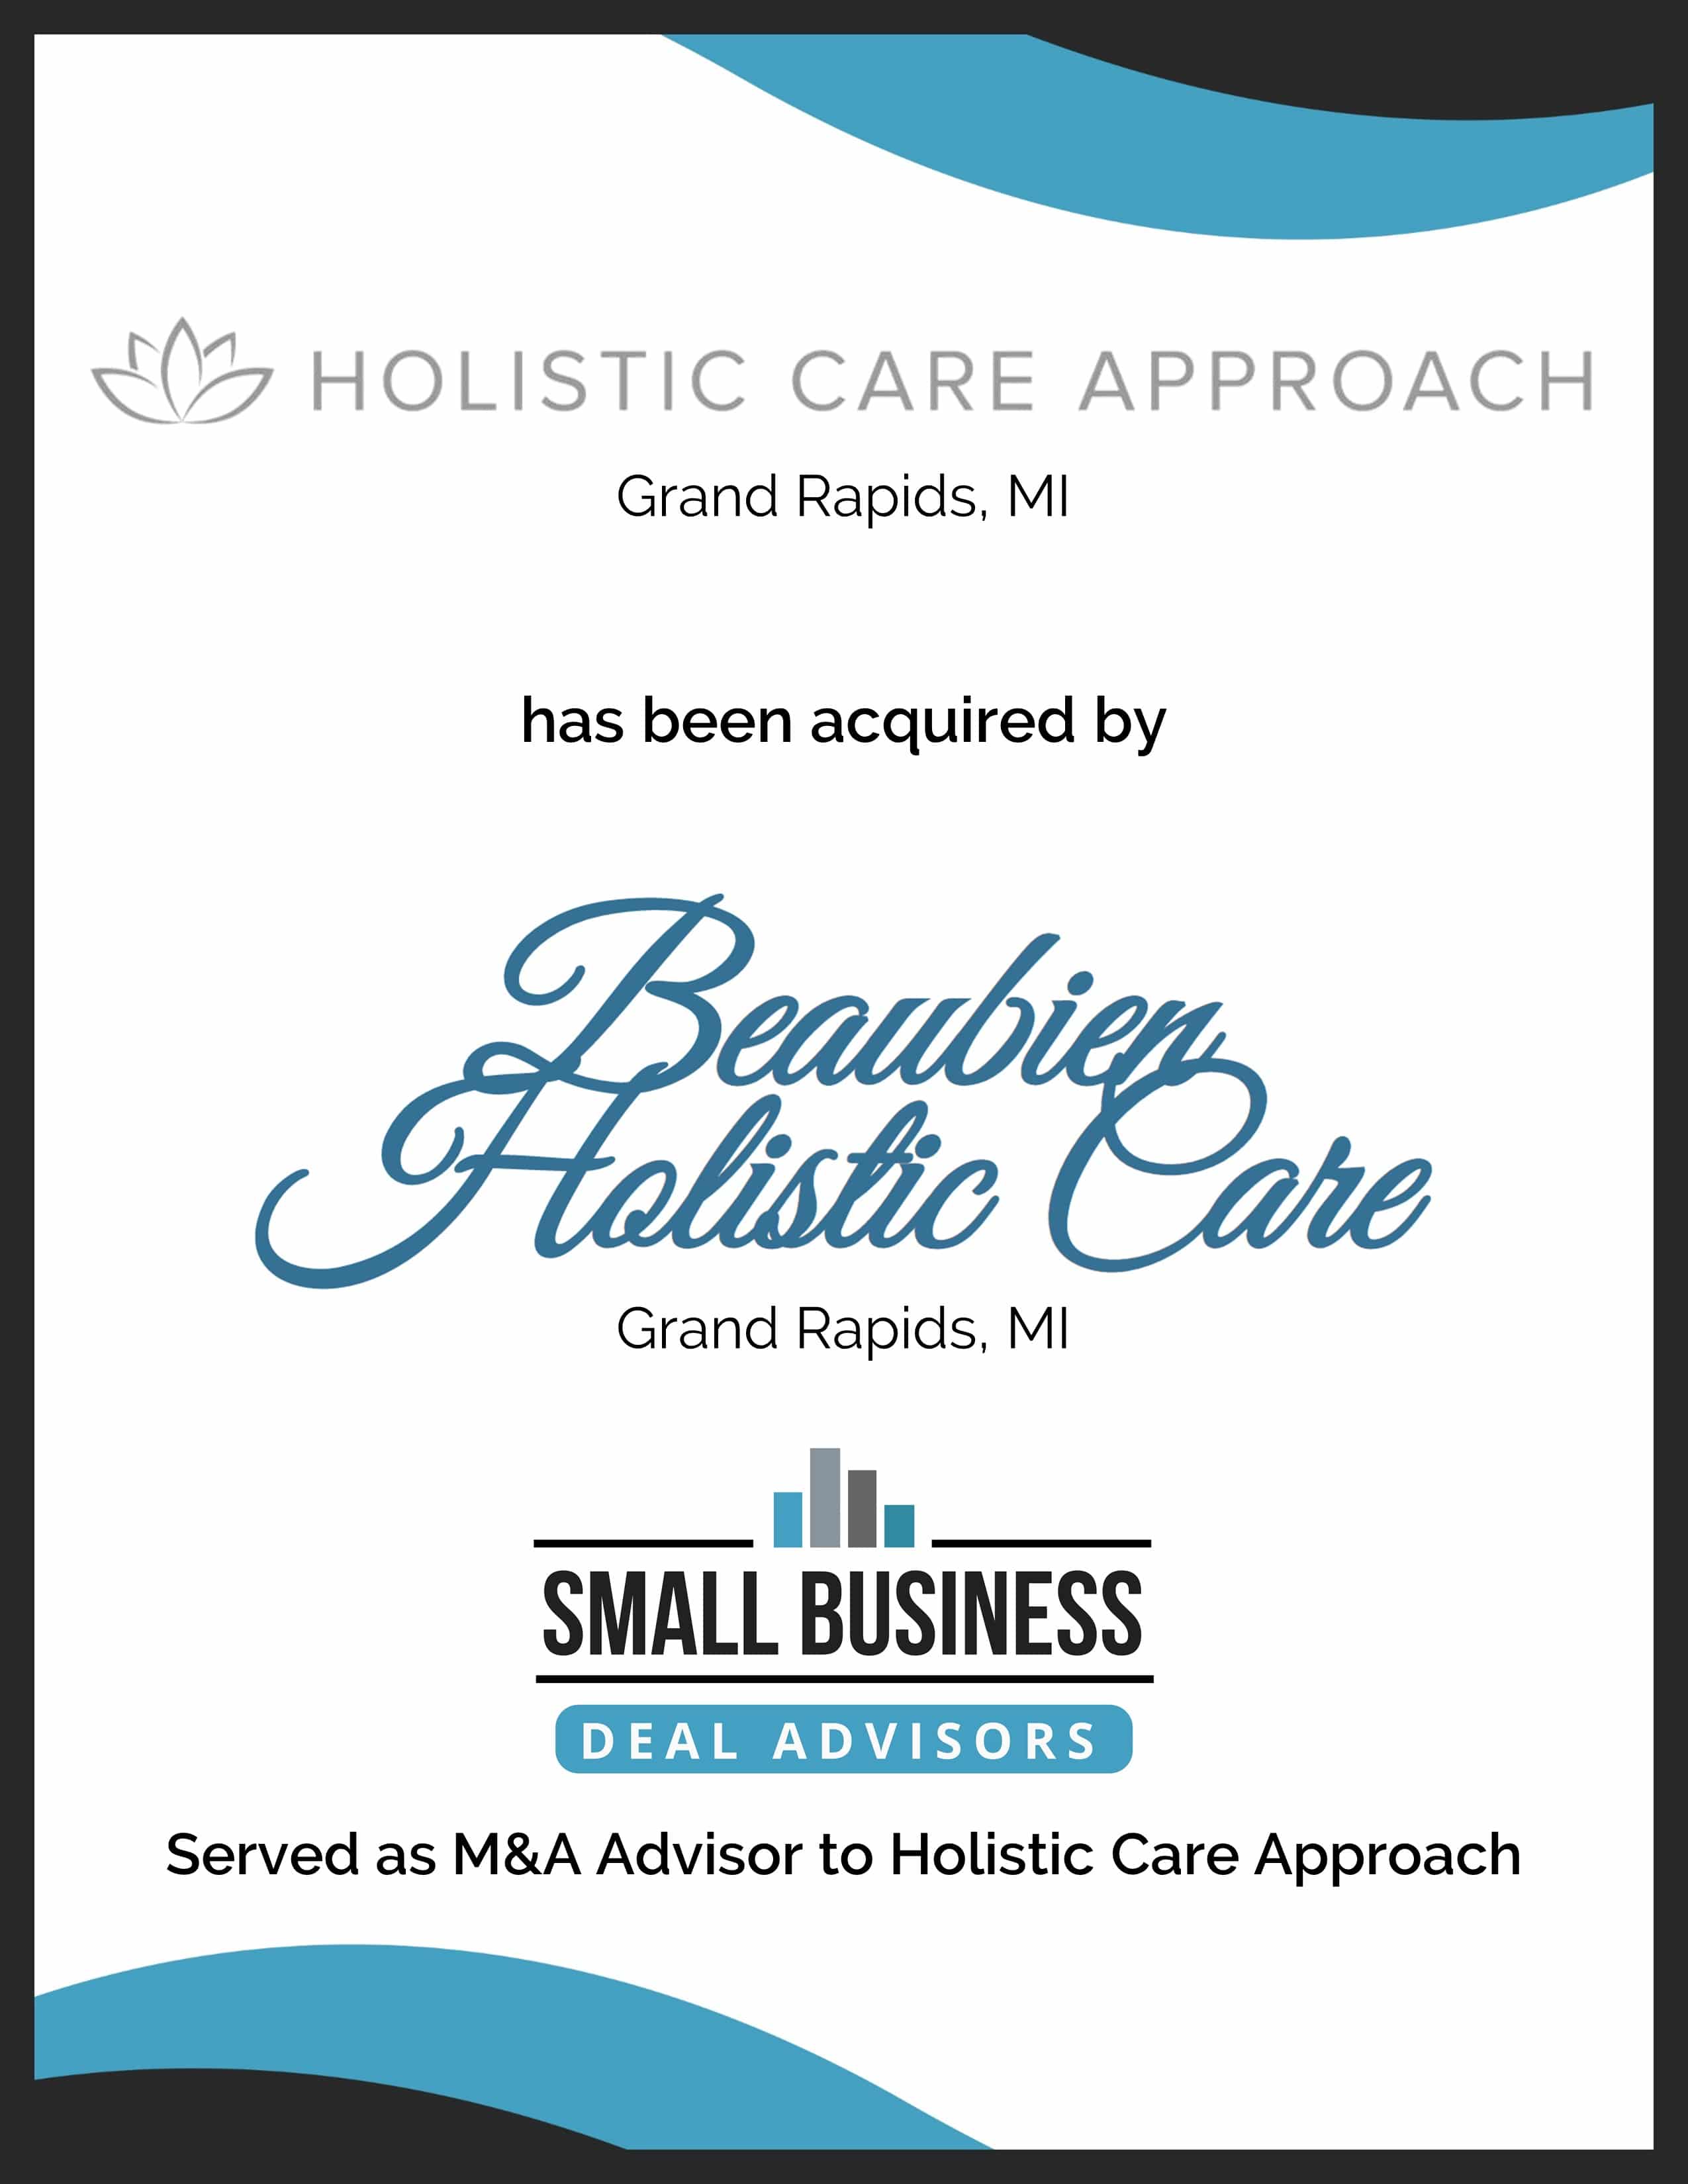 Holistic Care Approach has been acquired by Beaubien Holistic Care